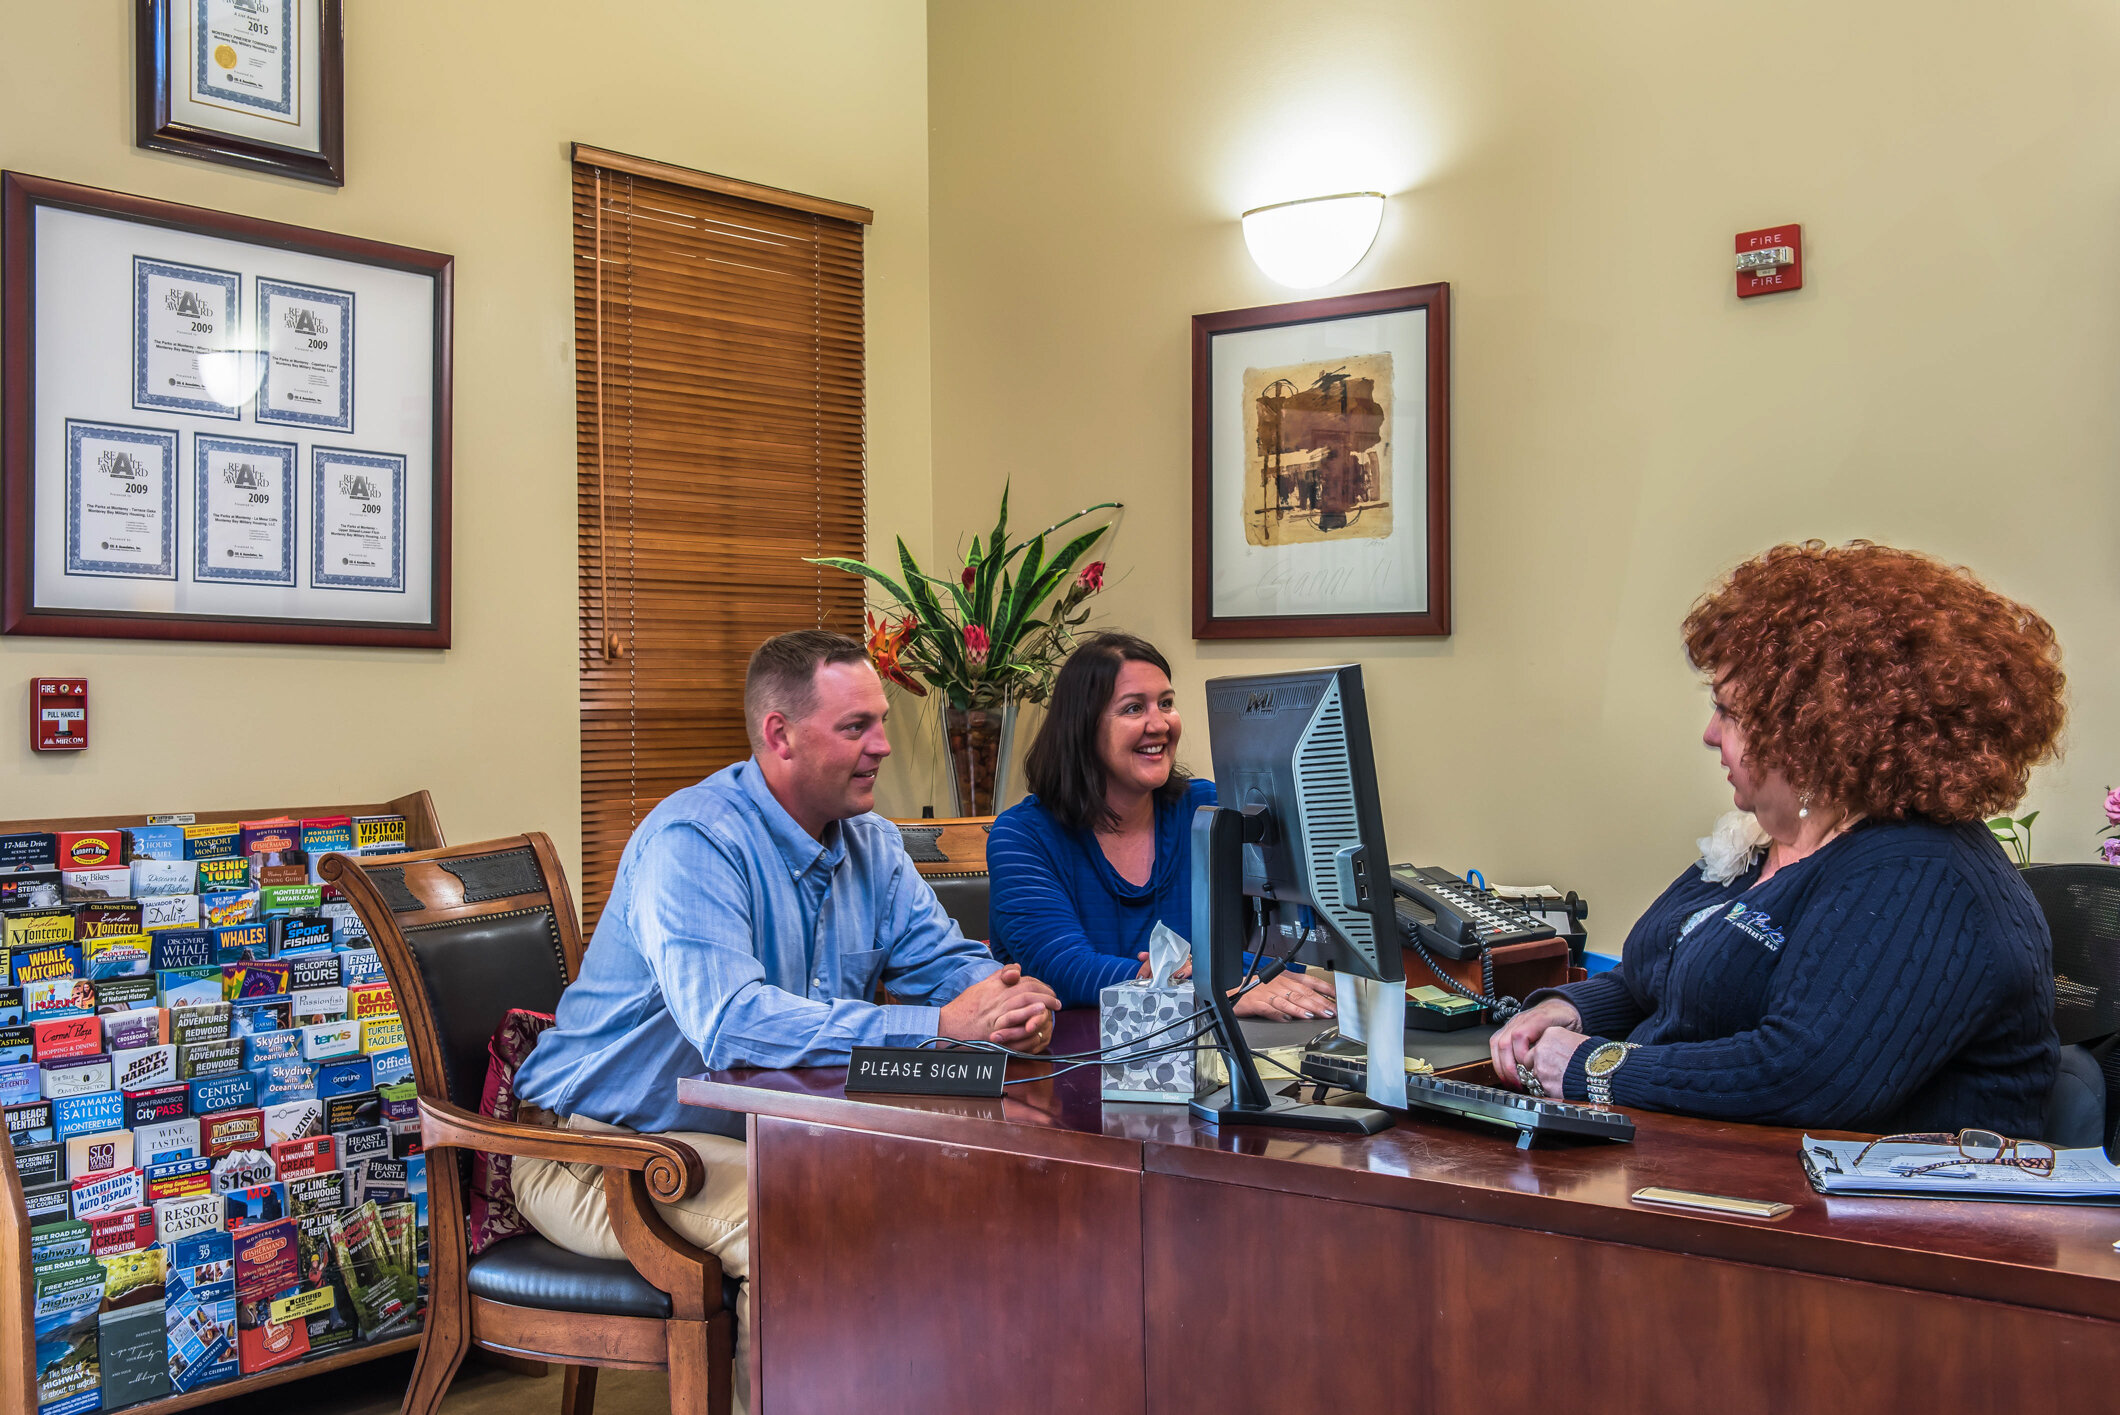 Our friendly leasing staff ensures residents are well taken care of at The Parks at Monterey.